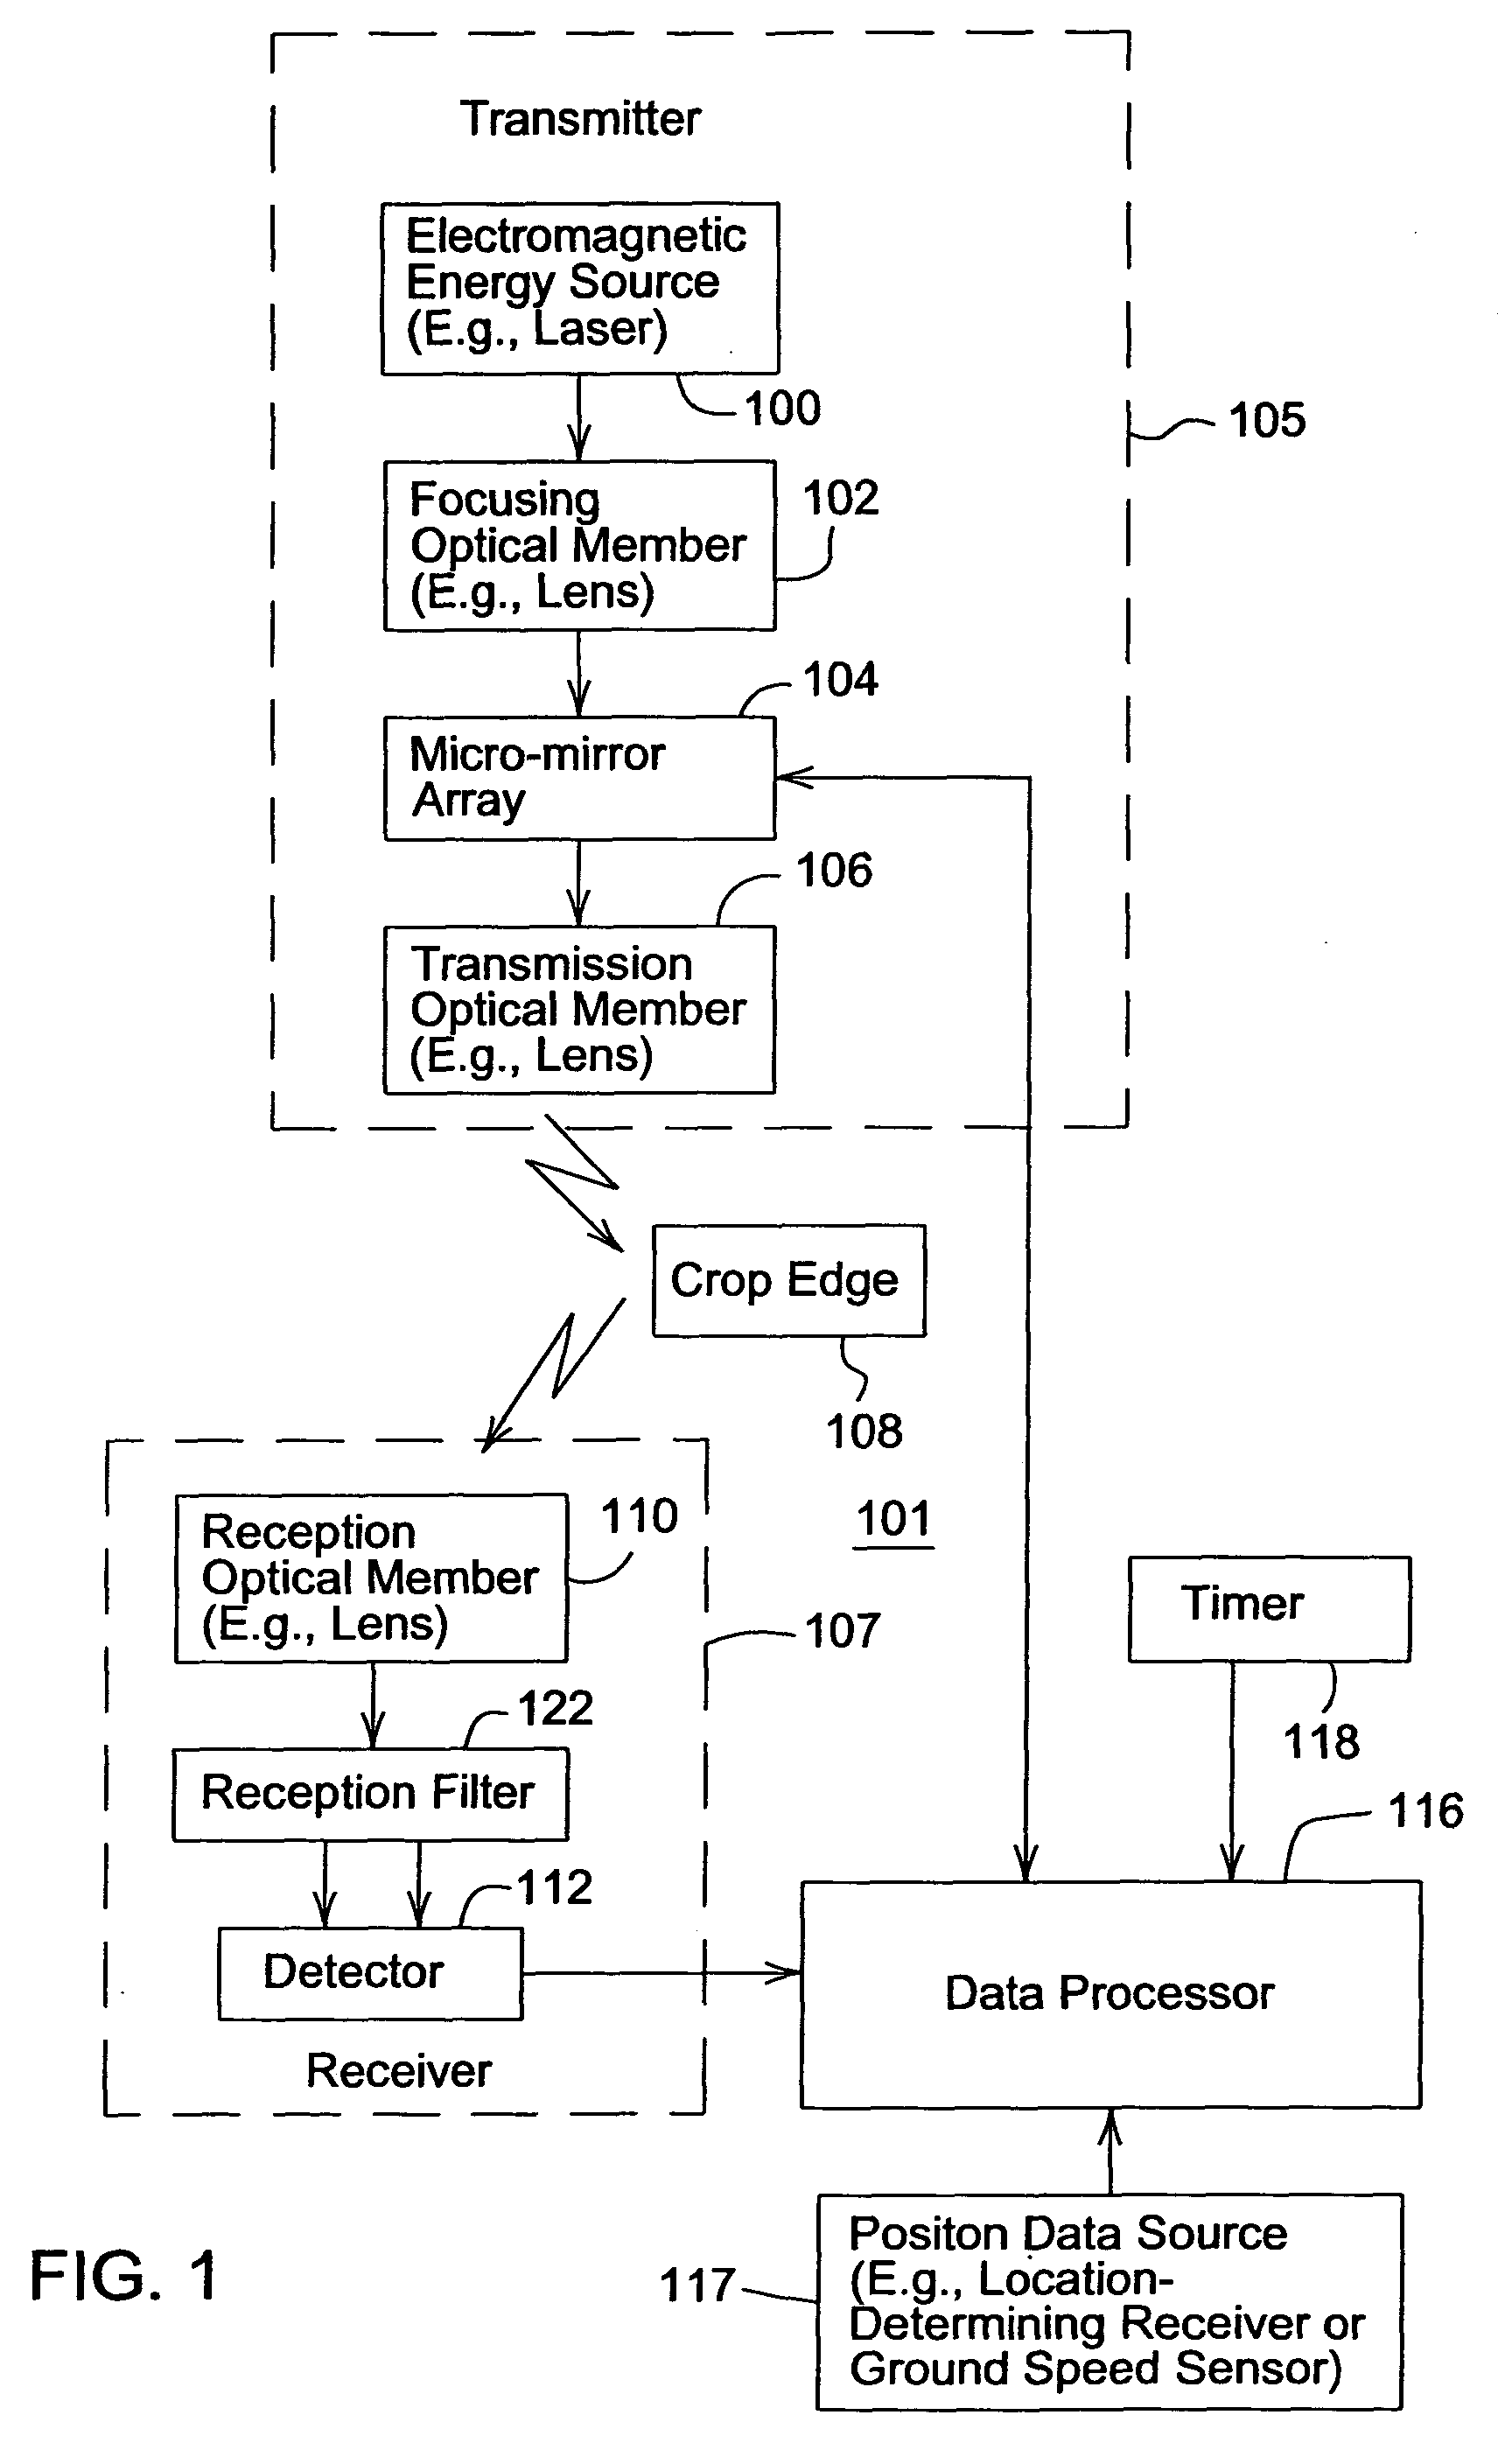 Method and system for identifying an edge of a crop